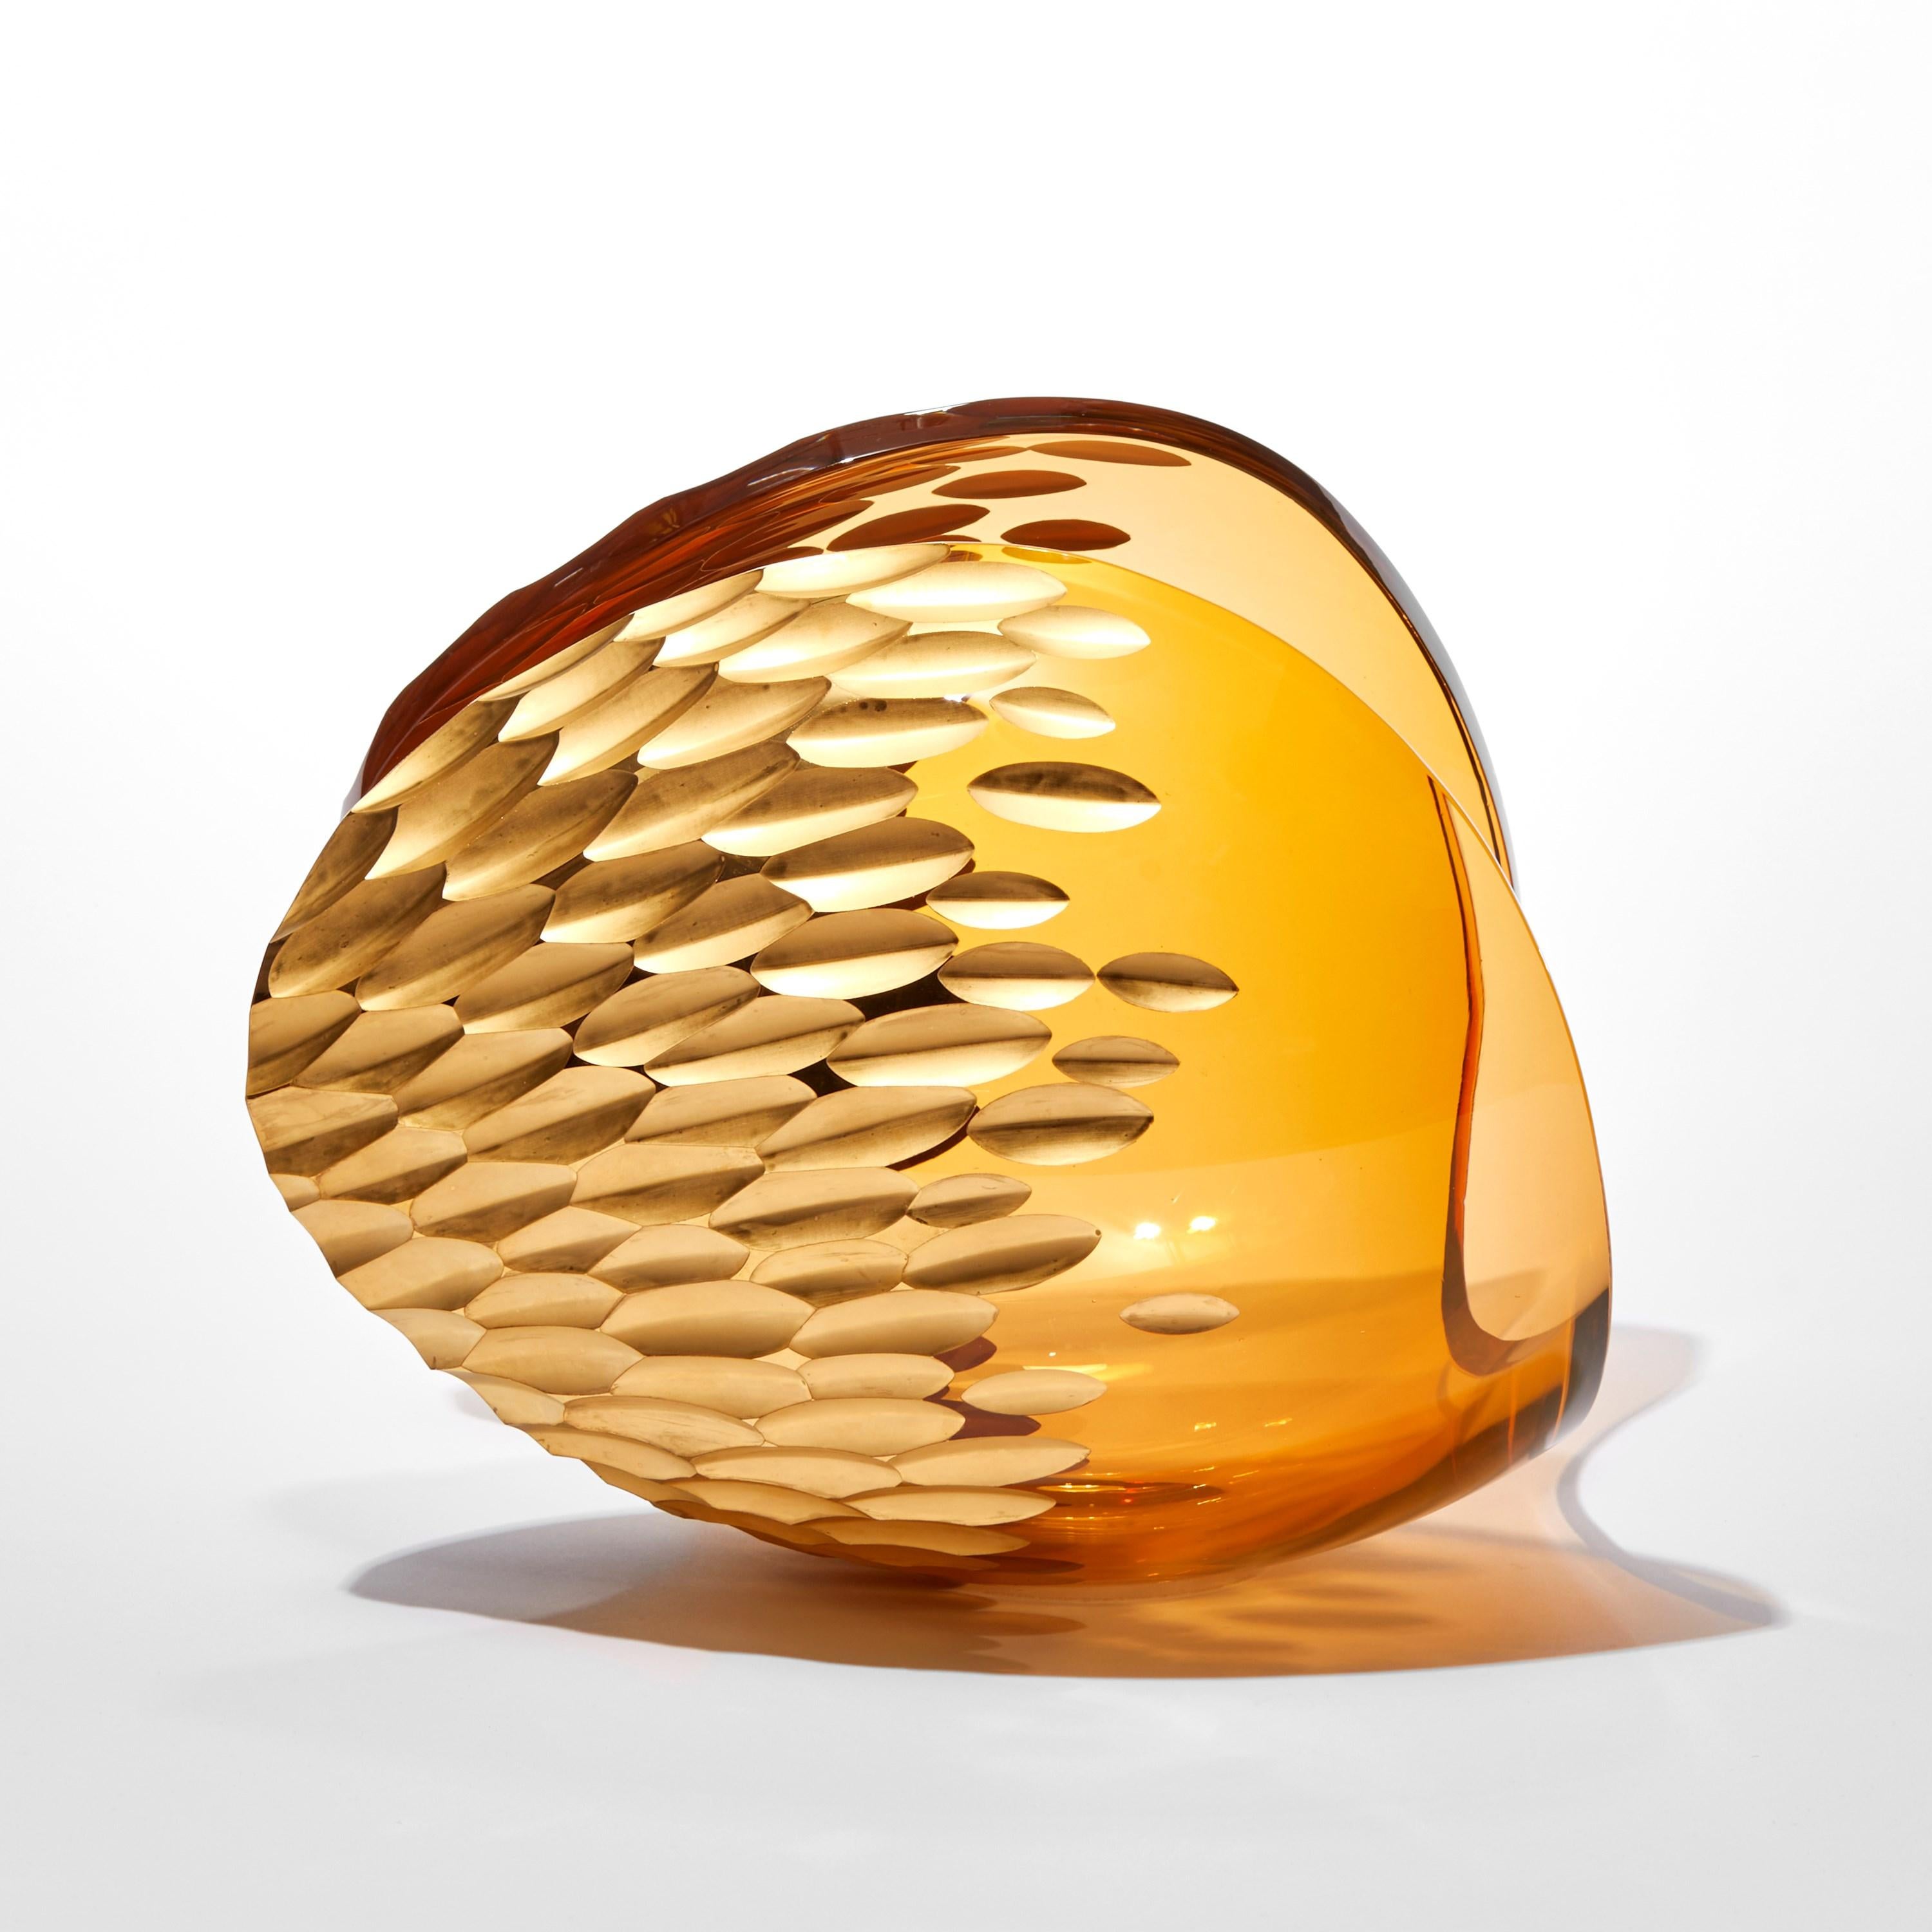 Hand-Crafted Planet in Amber Gold, a handblown glass & 23 ct gold sculpture by Lena Bergström